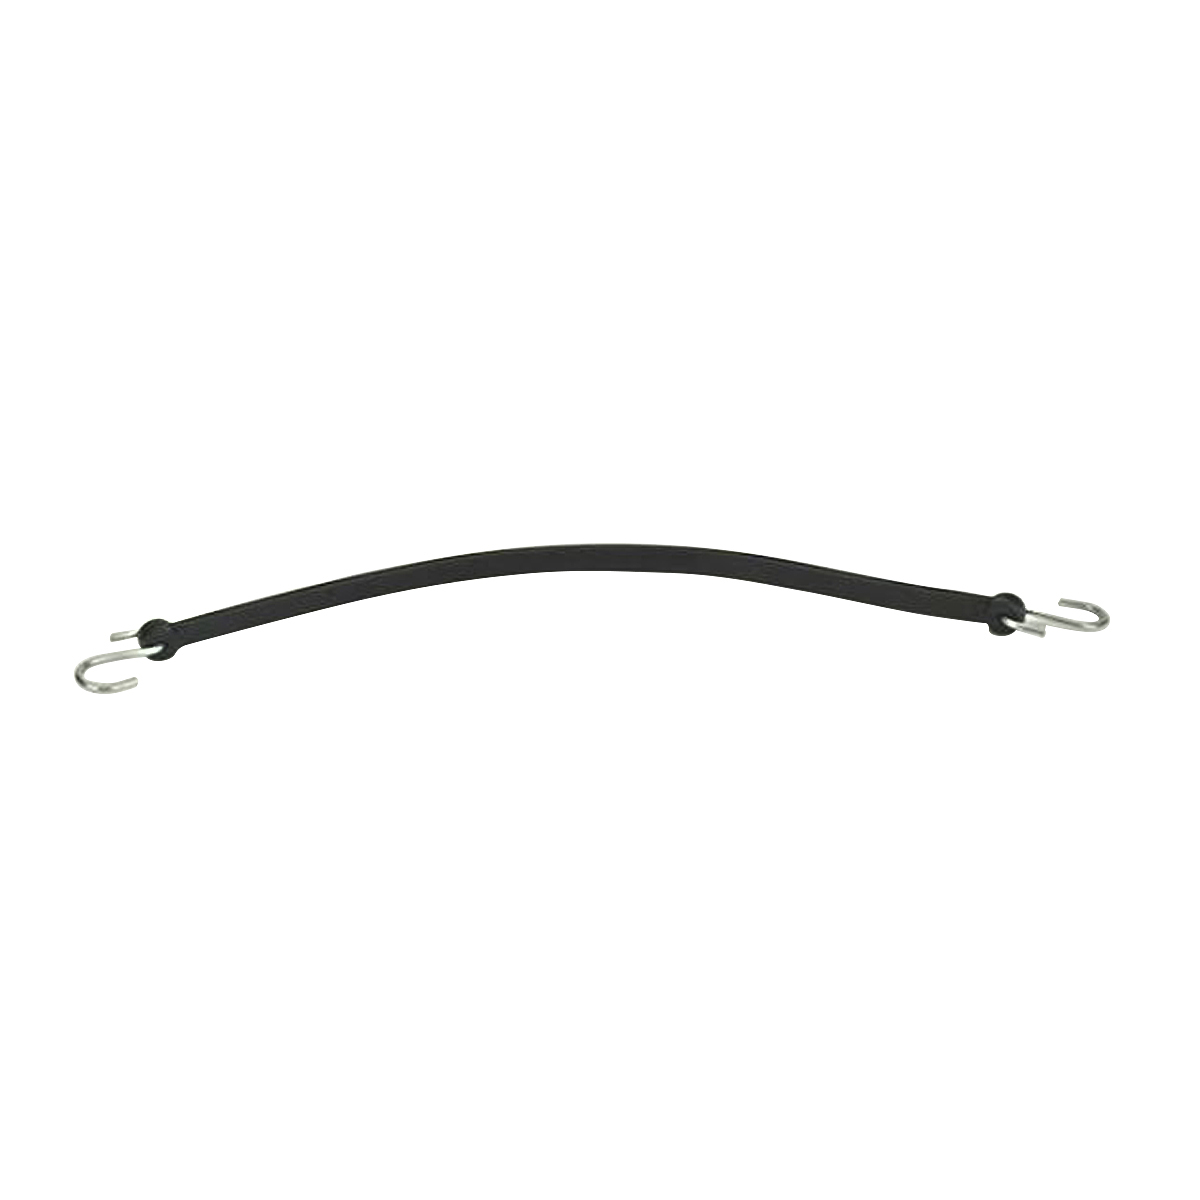 Rubber Tie-down Strap with S-Hooks, 28